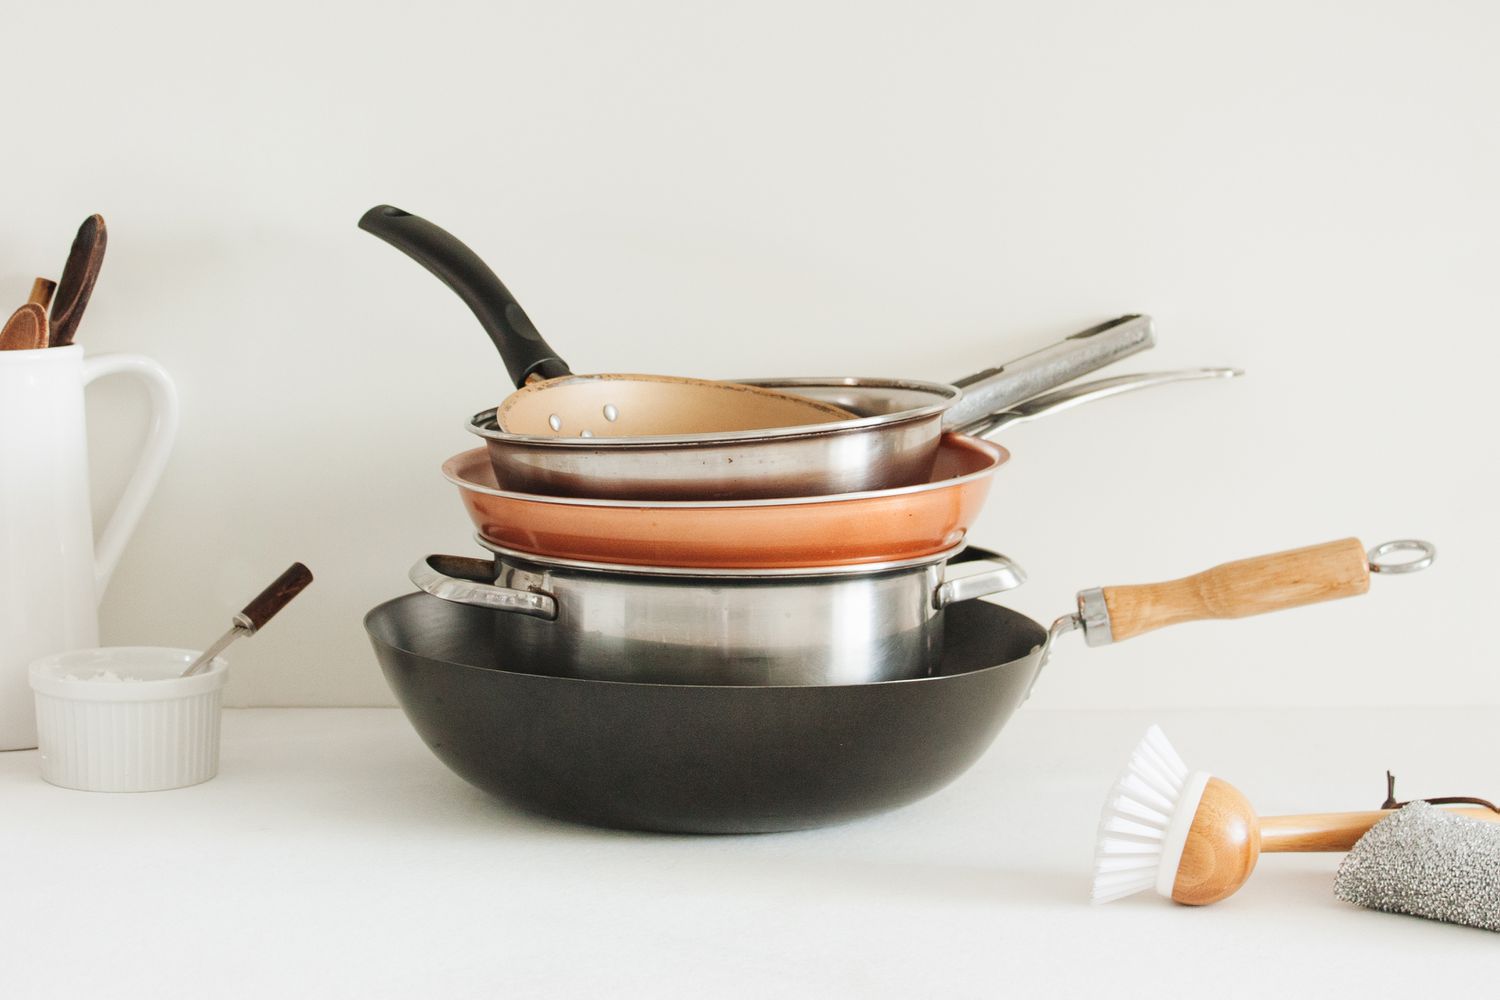 How are non-stick tadka pans different from regular pans?